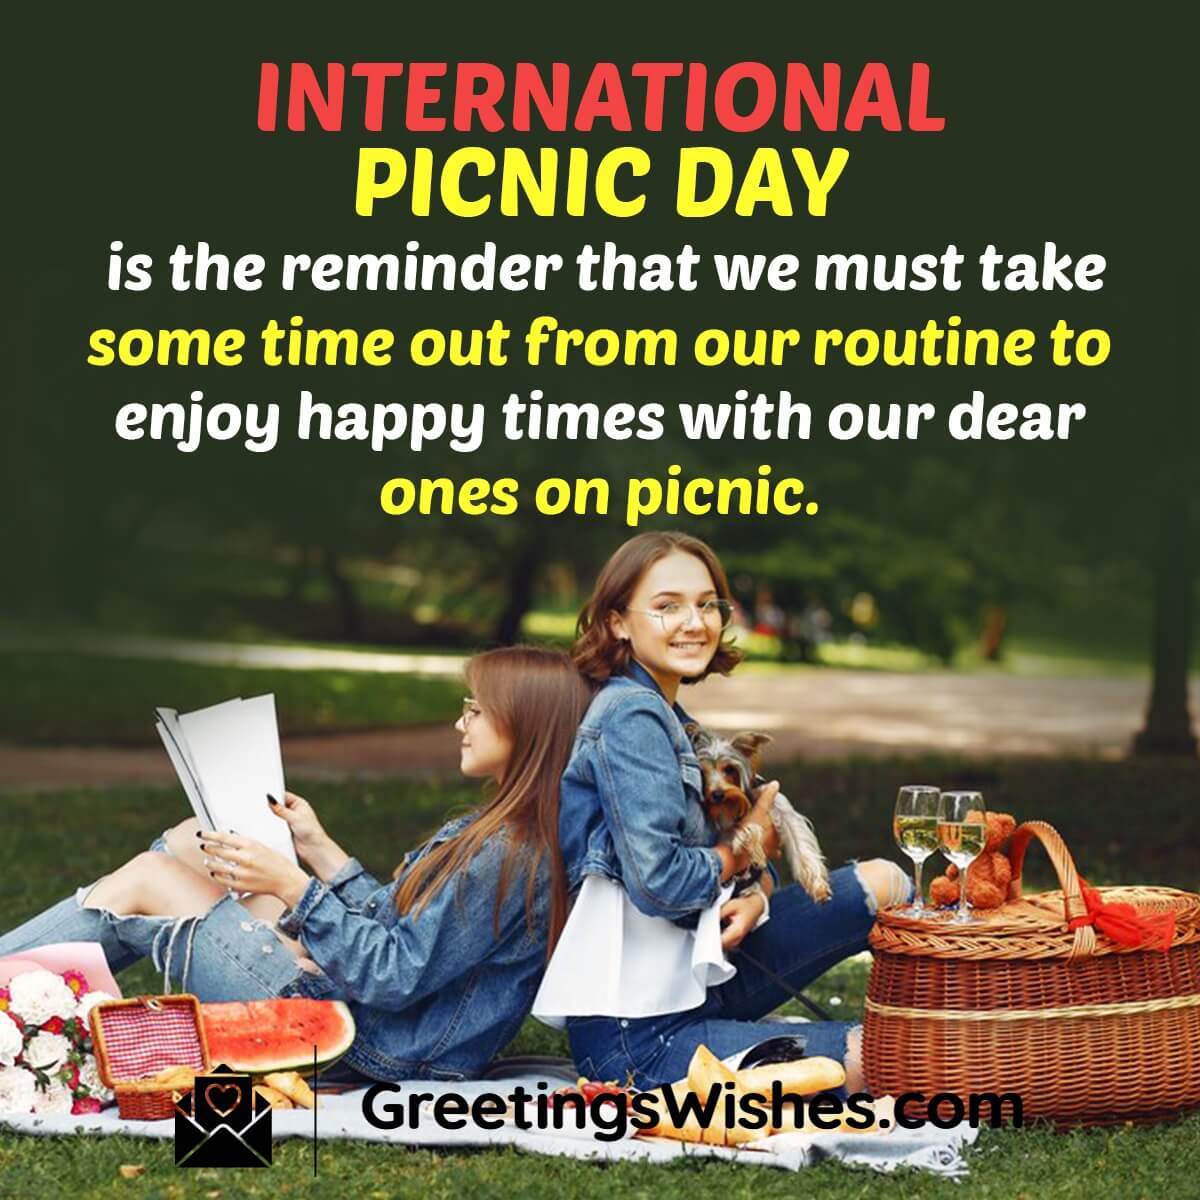 International Picnic Day Messages